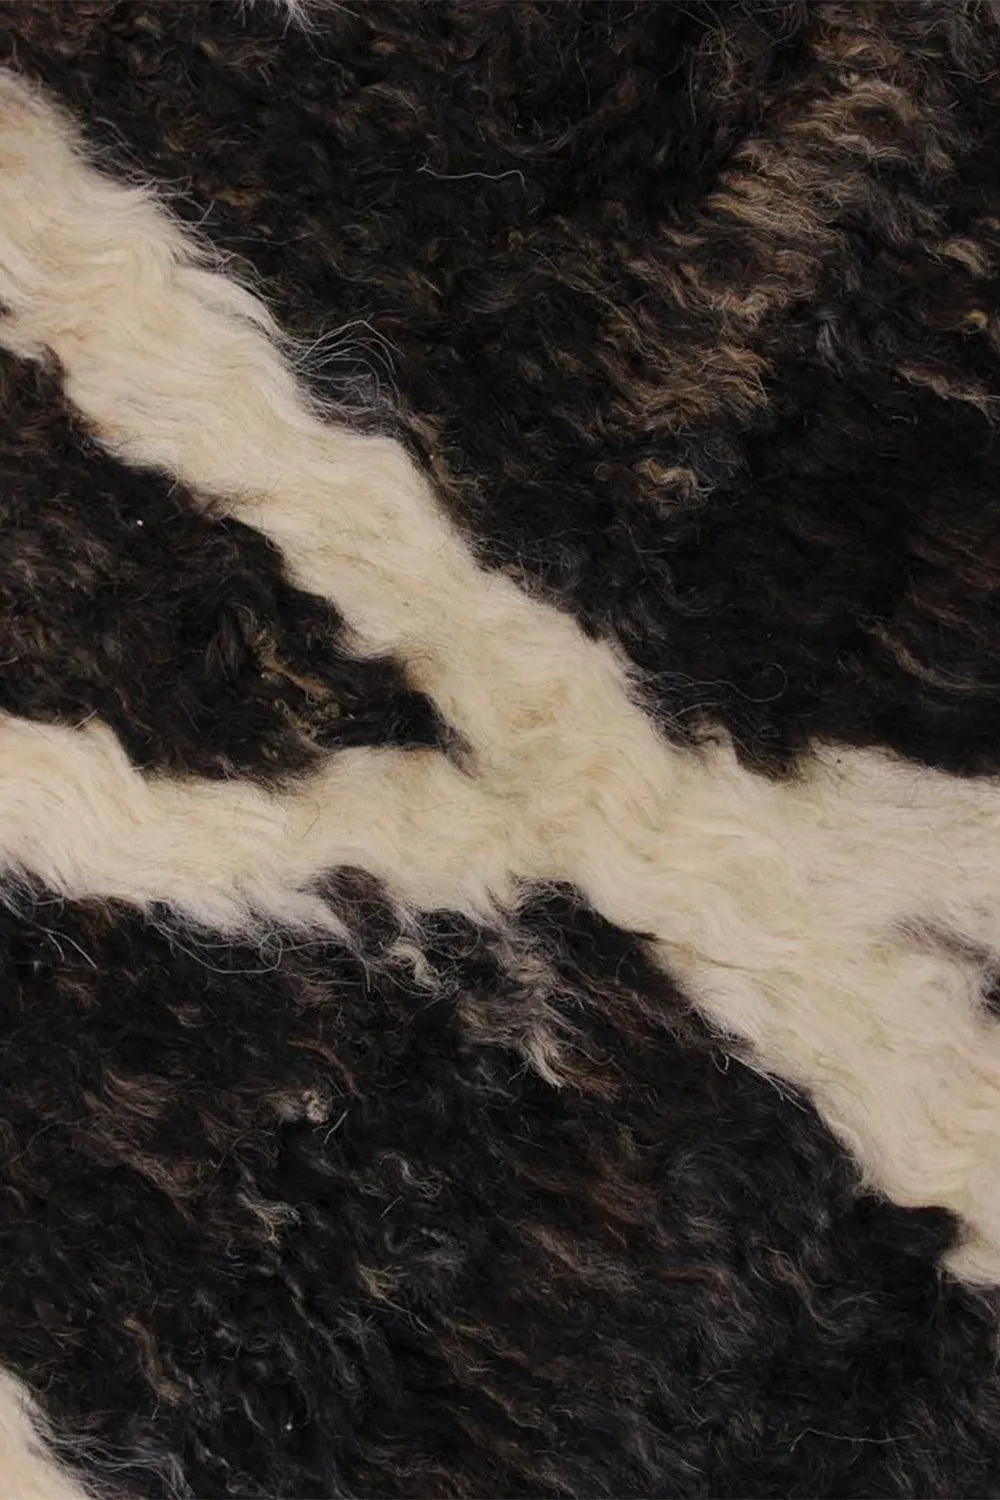 High pile area rug in black and white, adding a bold statement to any room.